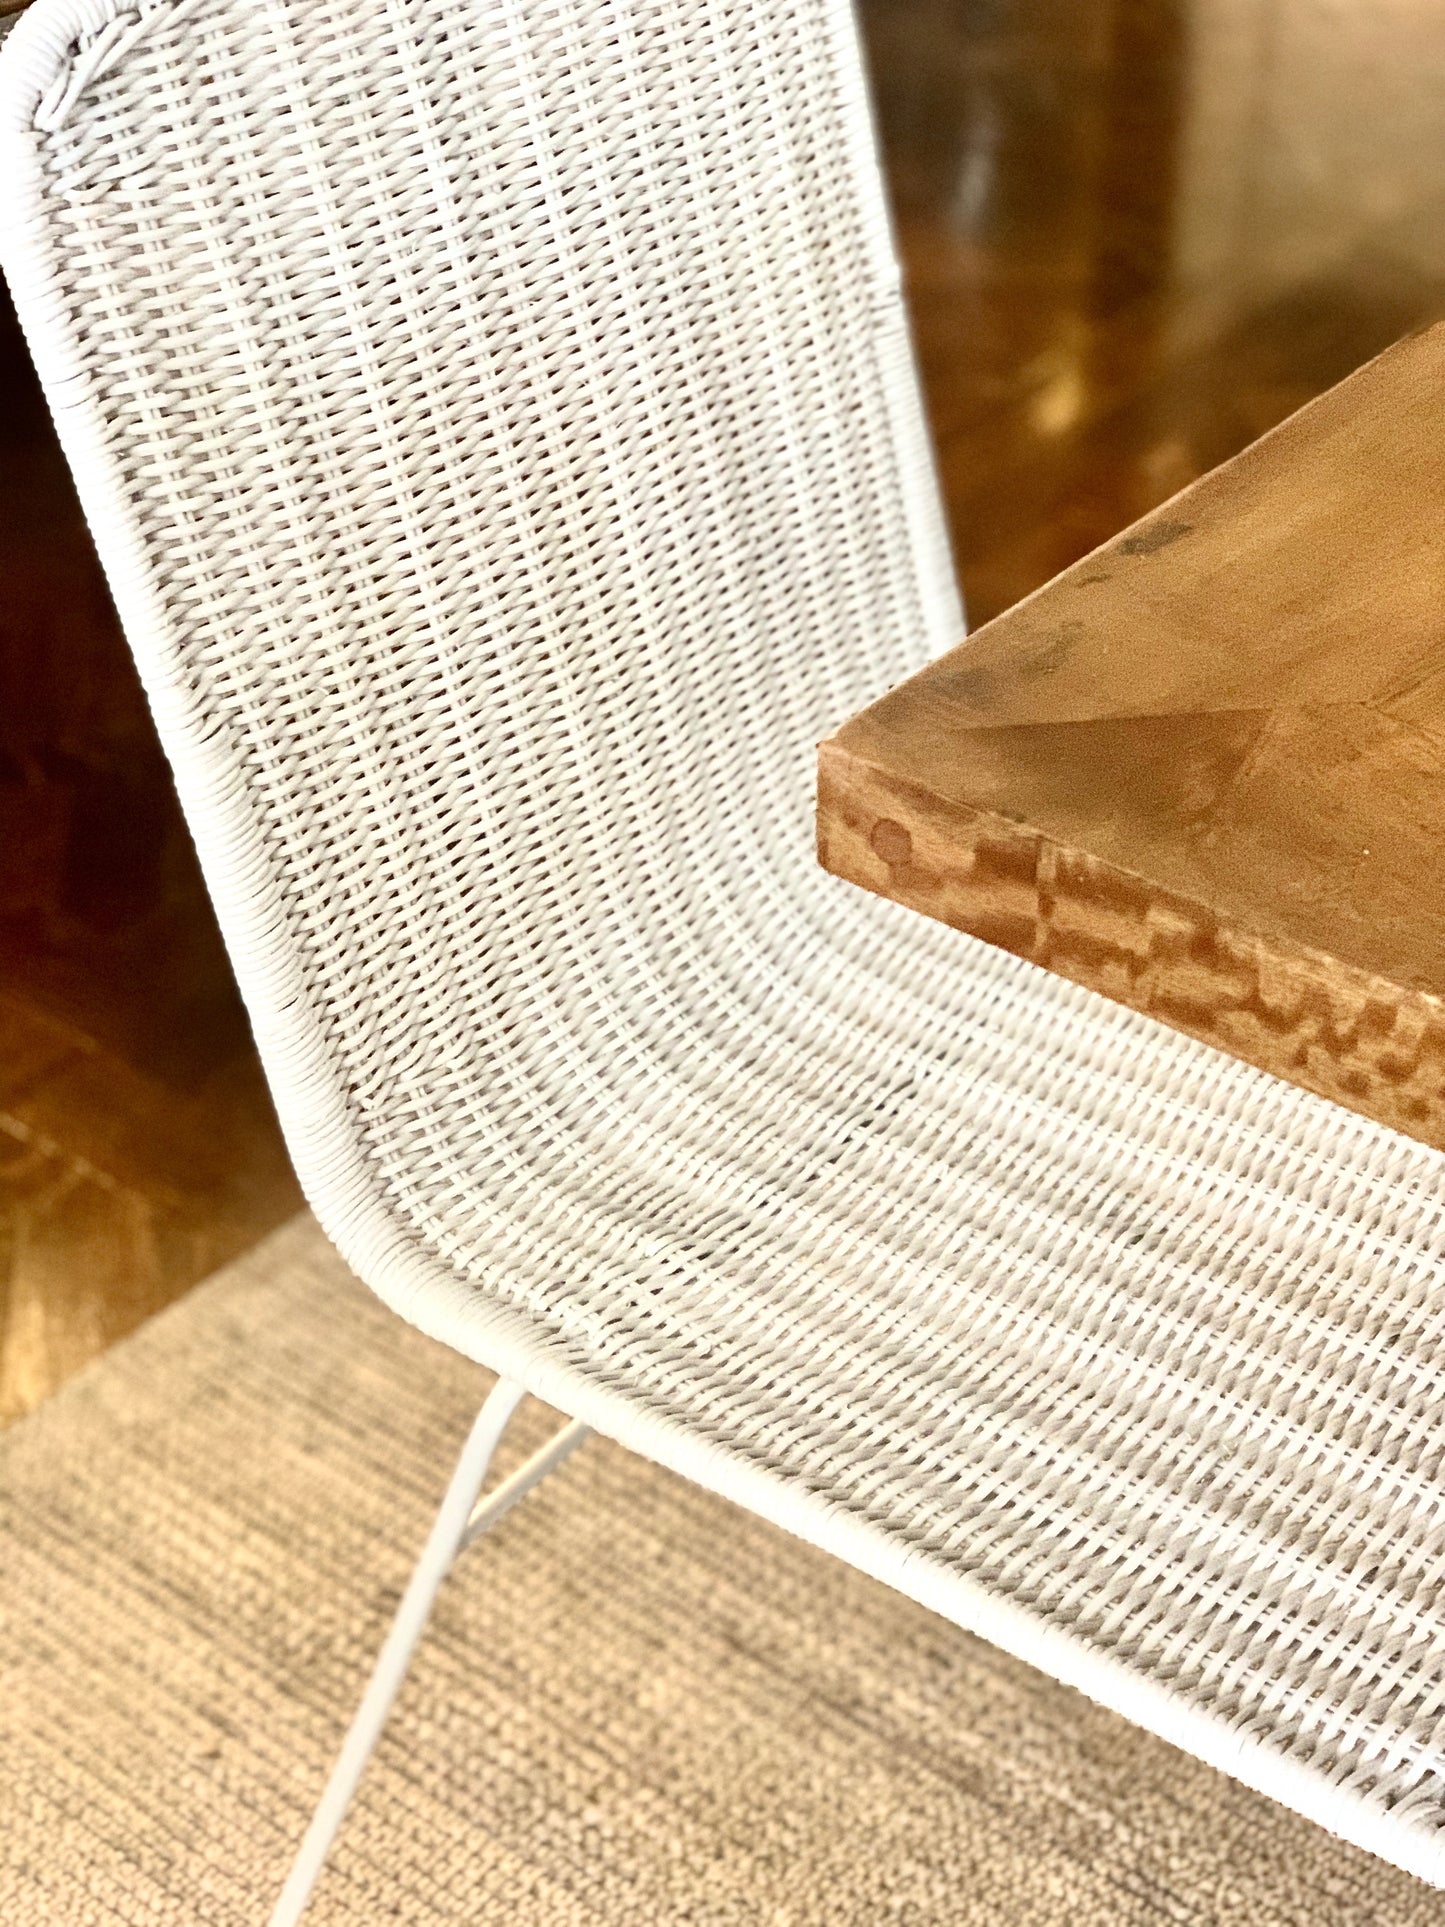 Musk Dining chair